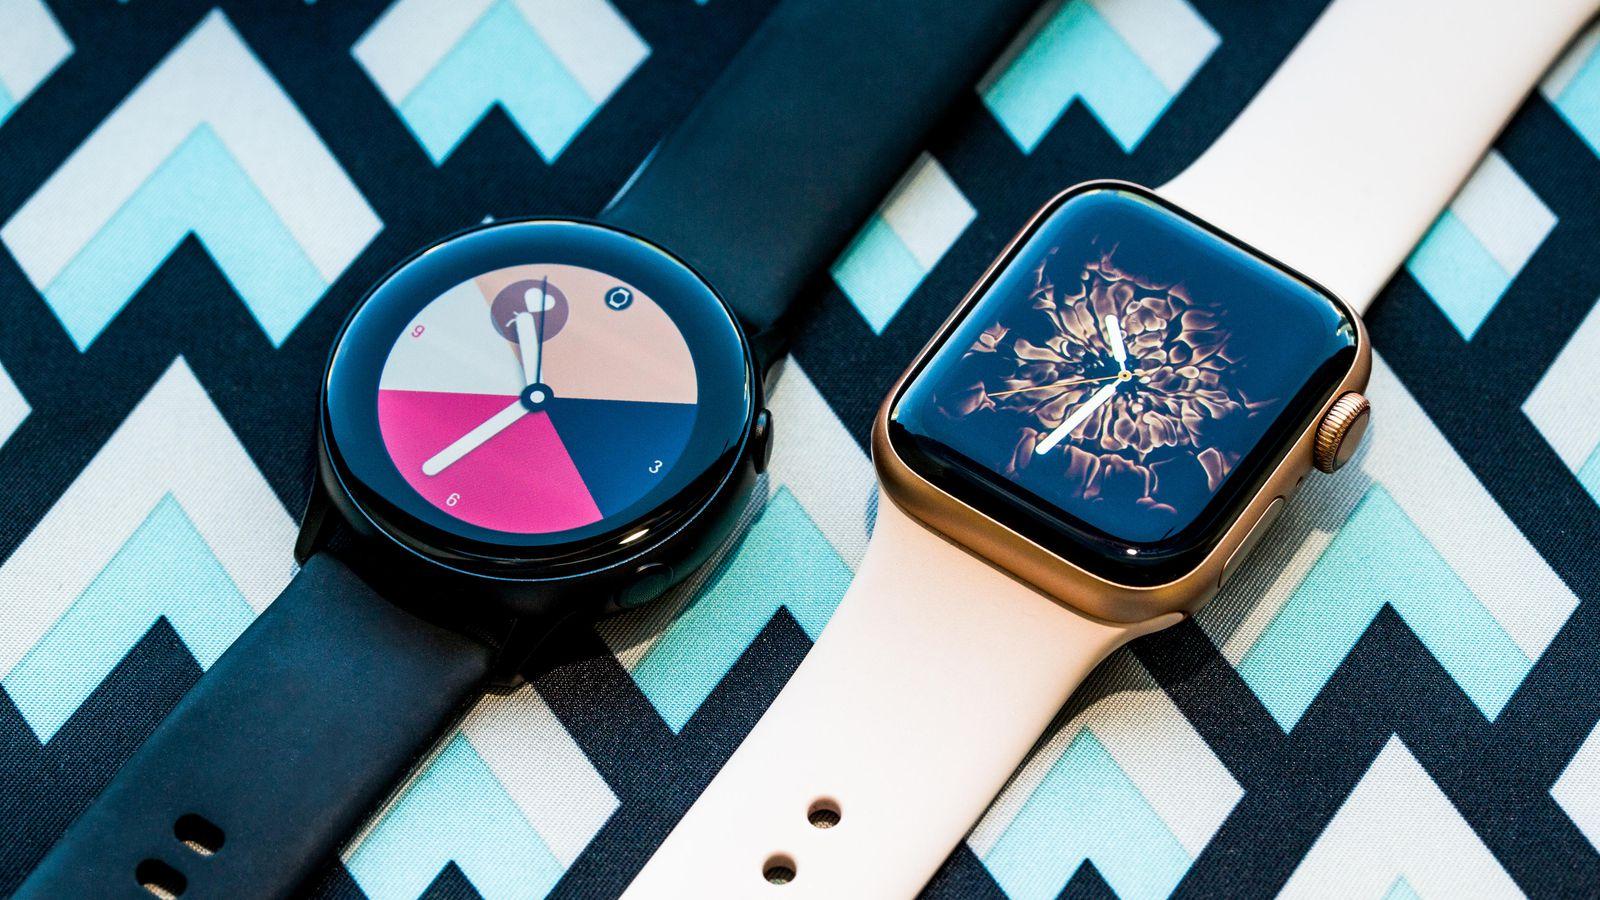 Apple Watch Series 4 vs. Galaxy Watch Active: What's the best